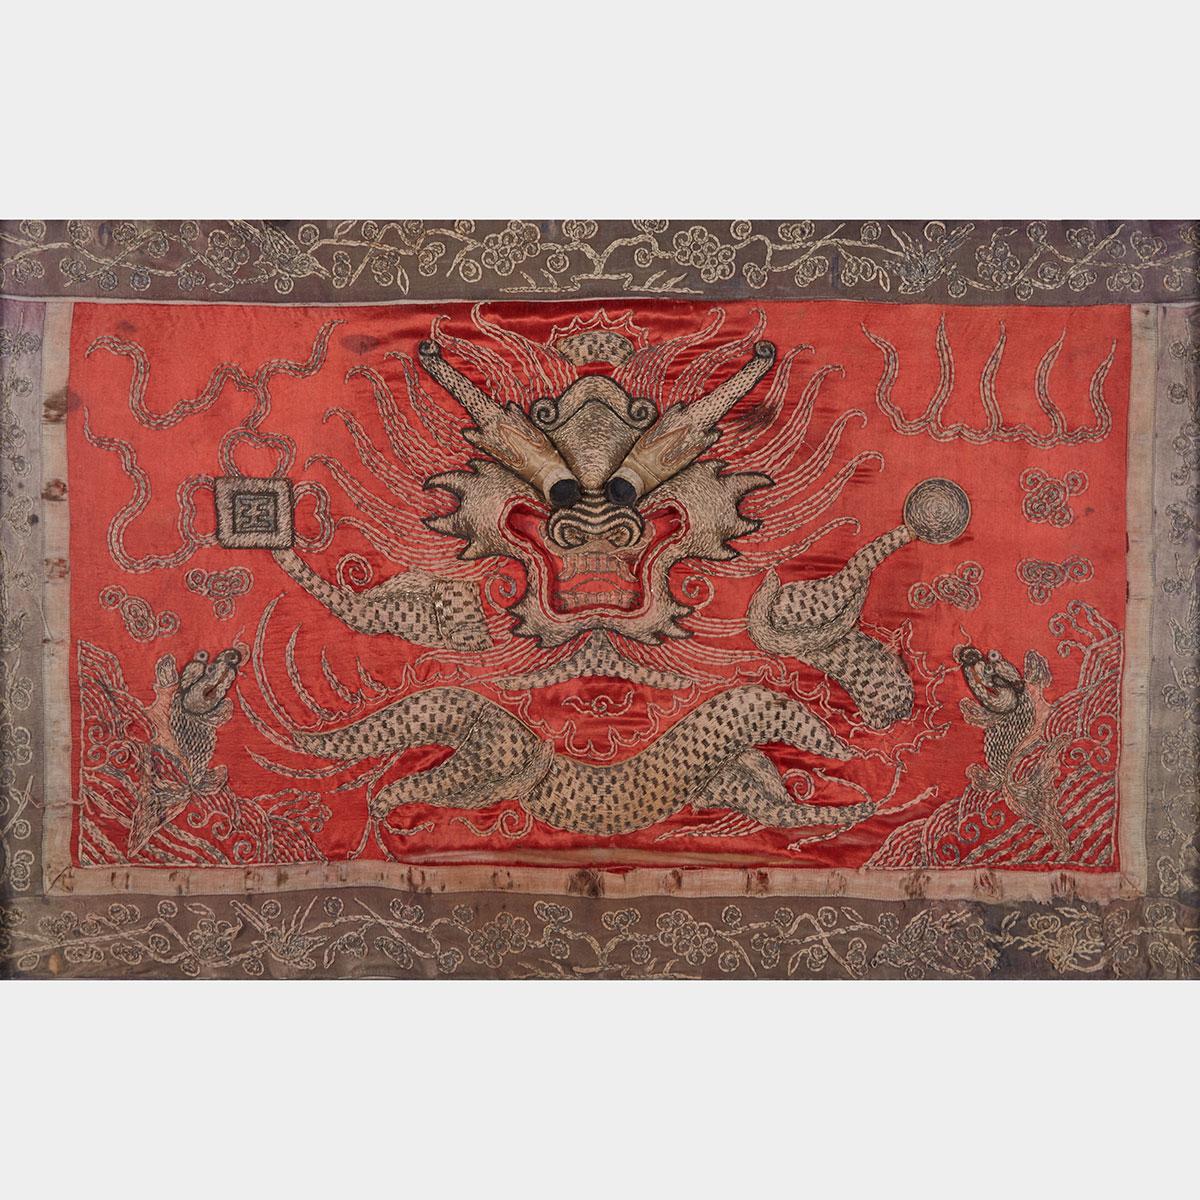 Silk Embroidered Dragon Banner, Late Qing Dynasty